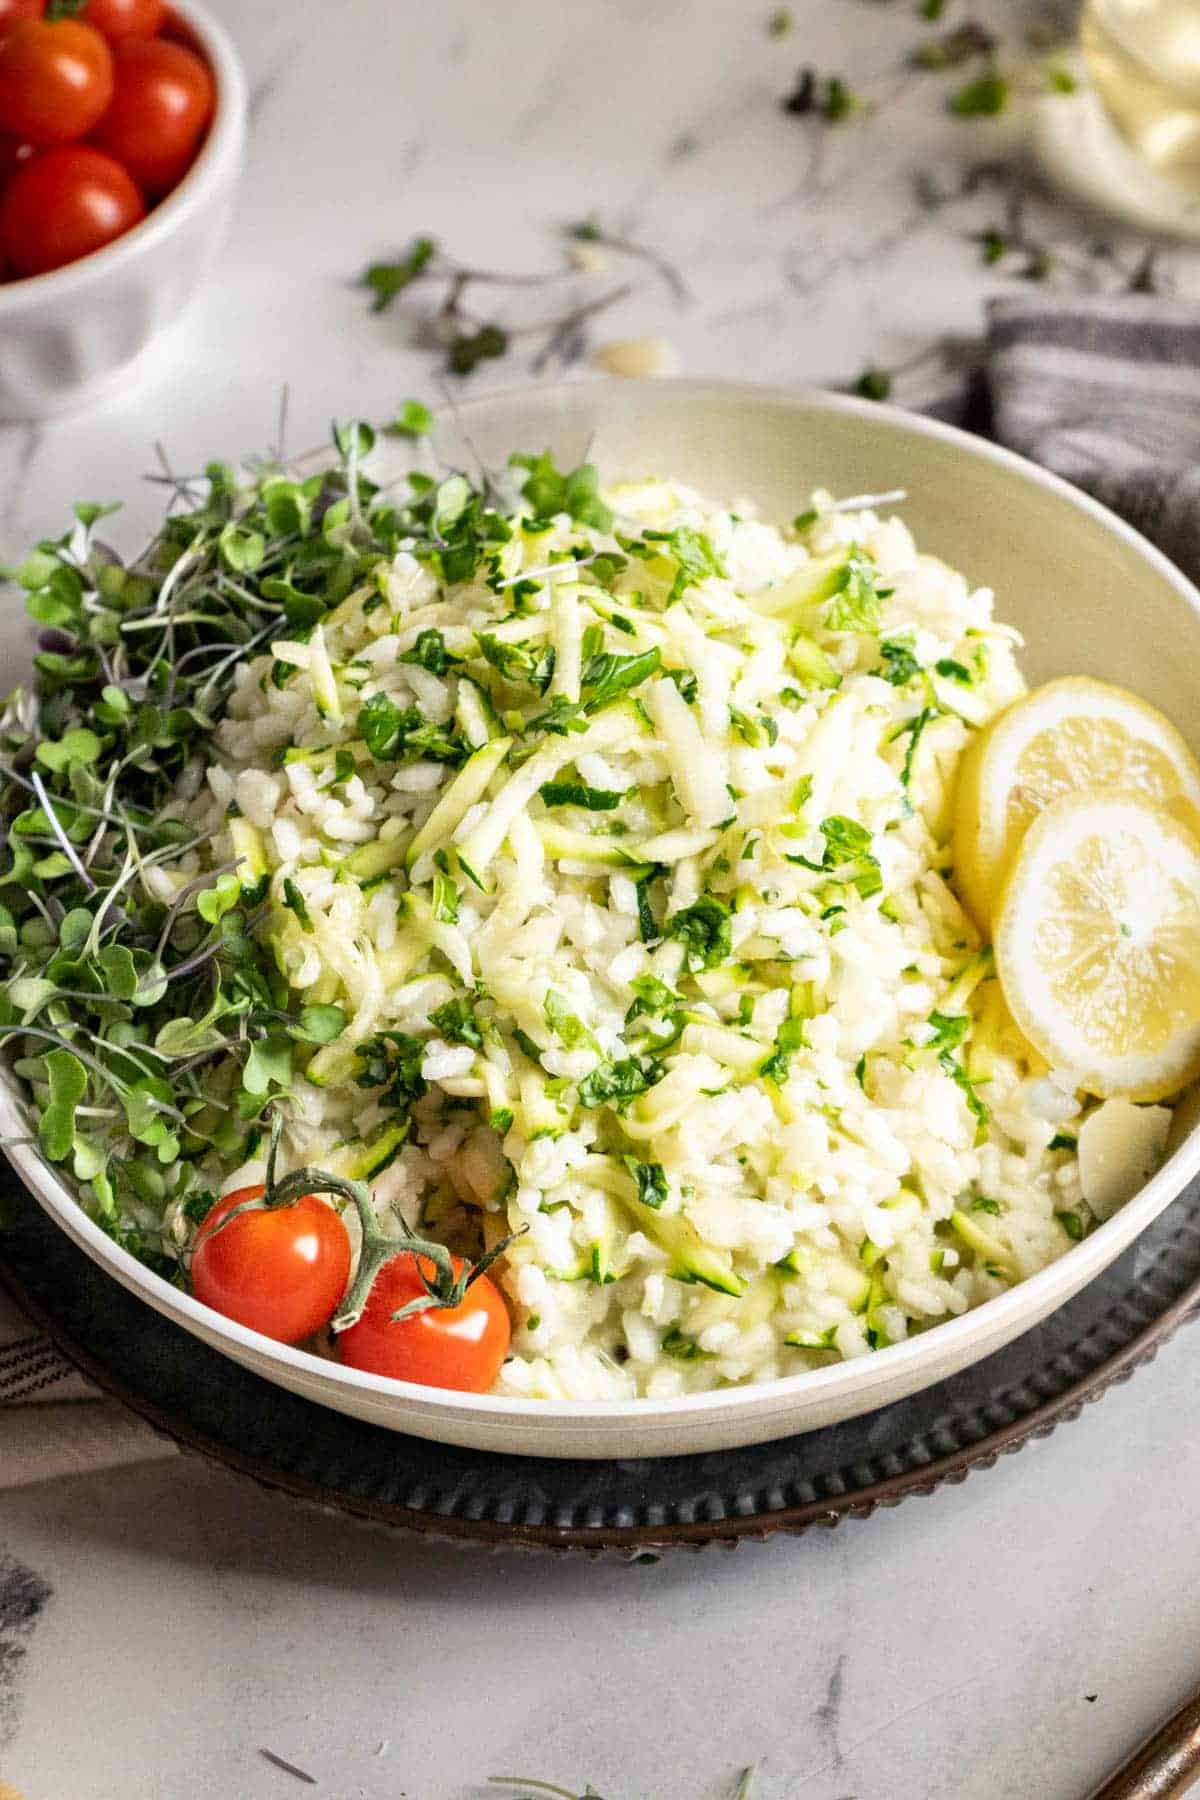 Zucchini Risotto in a bowl with lemon slices, tomatoes, and microgreens.